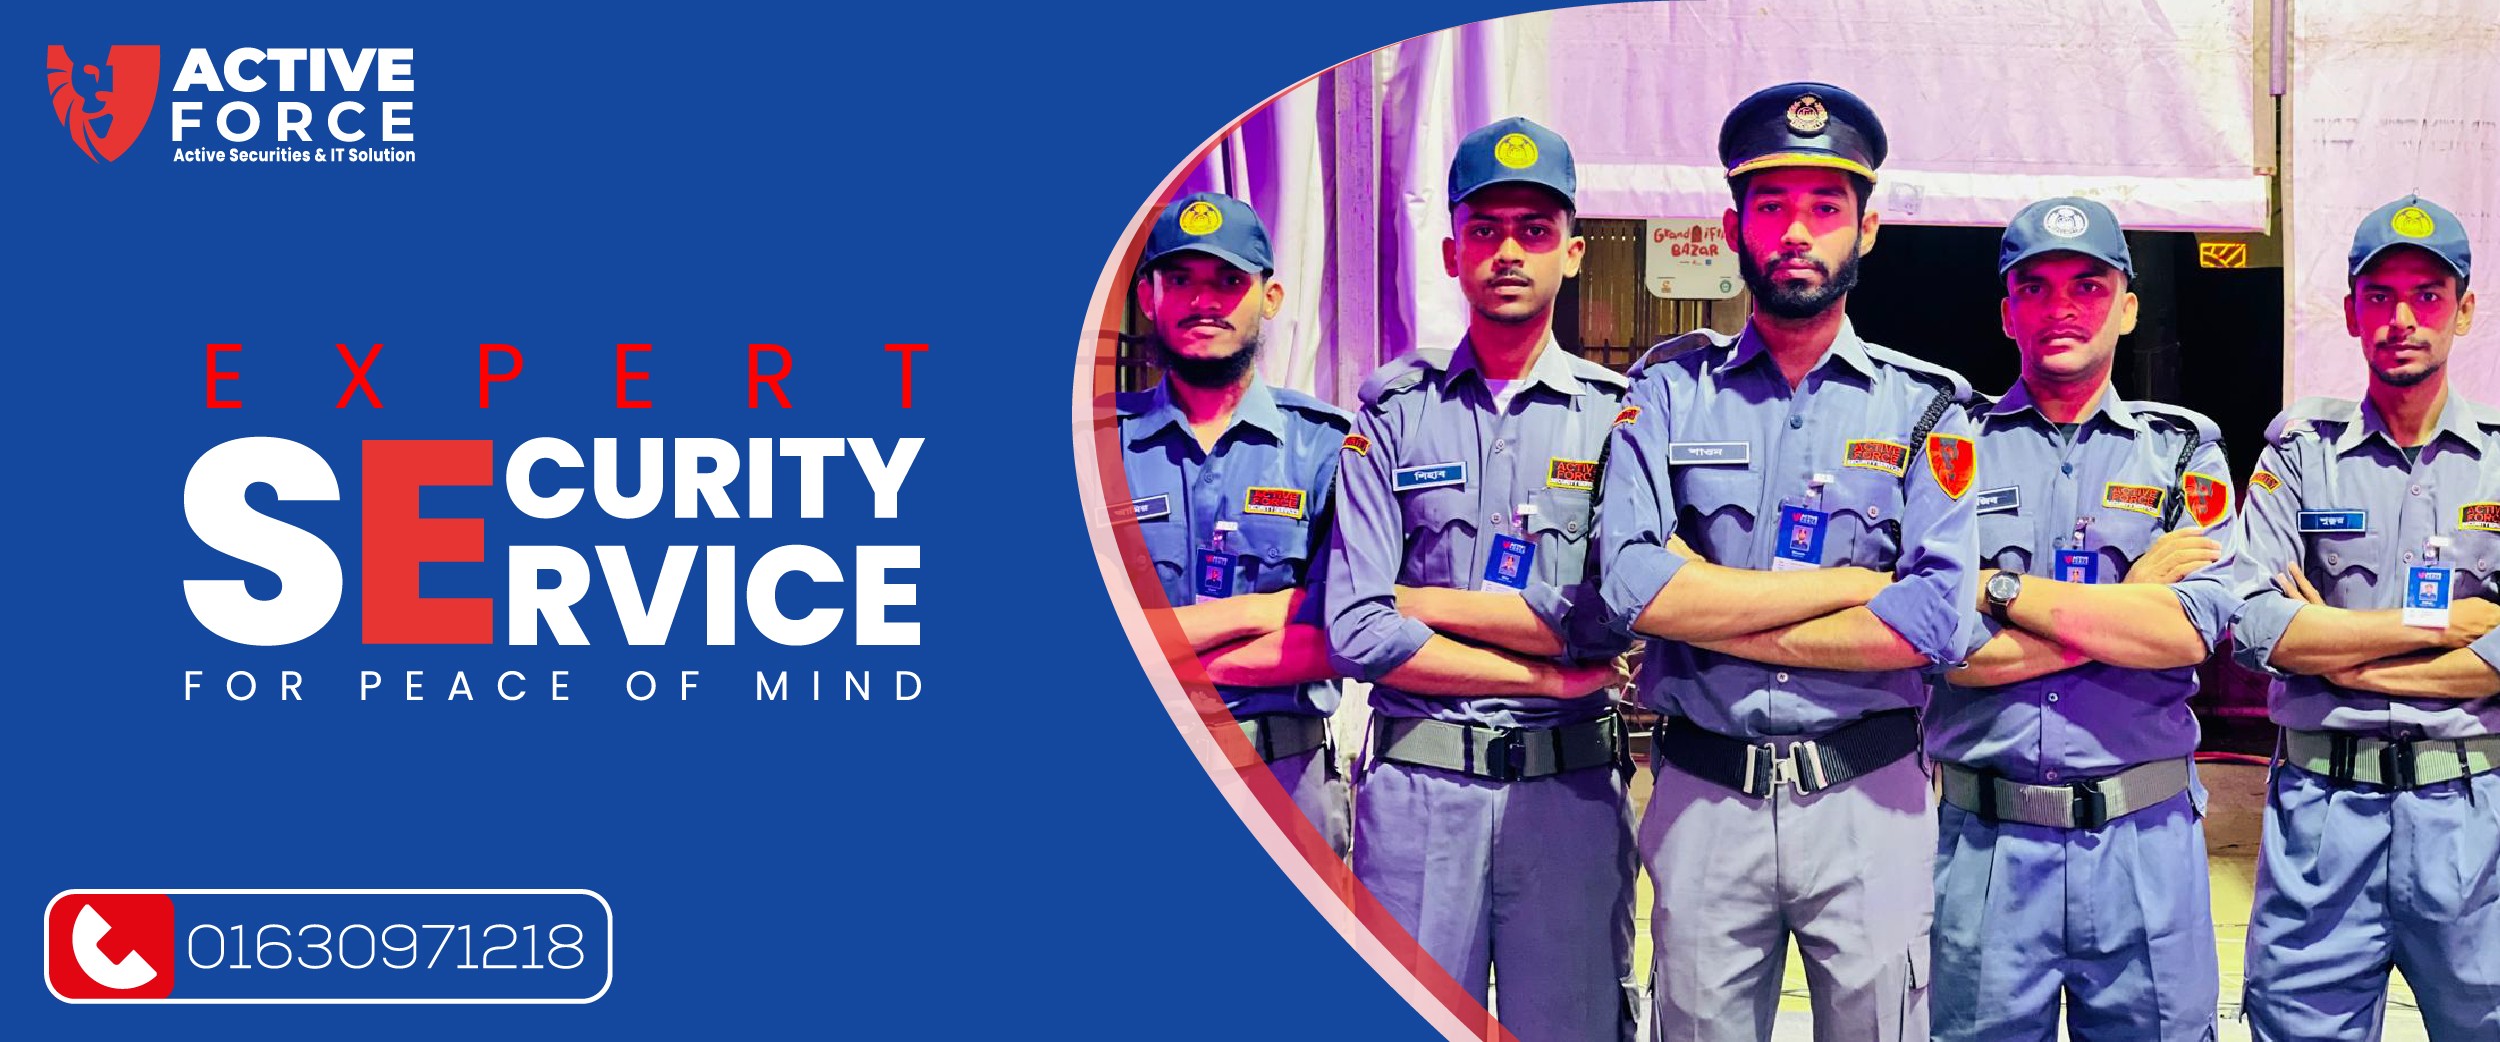 Expert Security Service in BD for Peace of Mind | Active Force